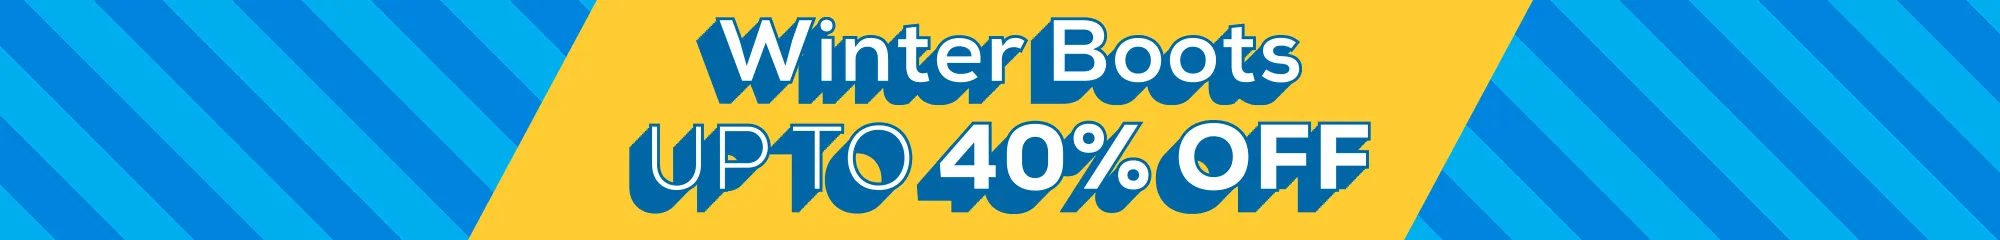 Winter Boots up to 40% Off